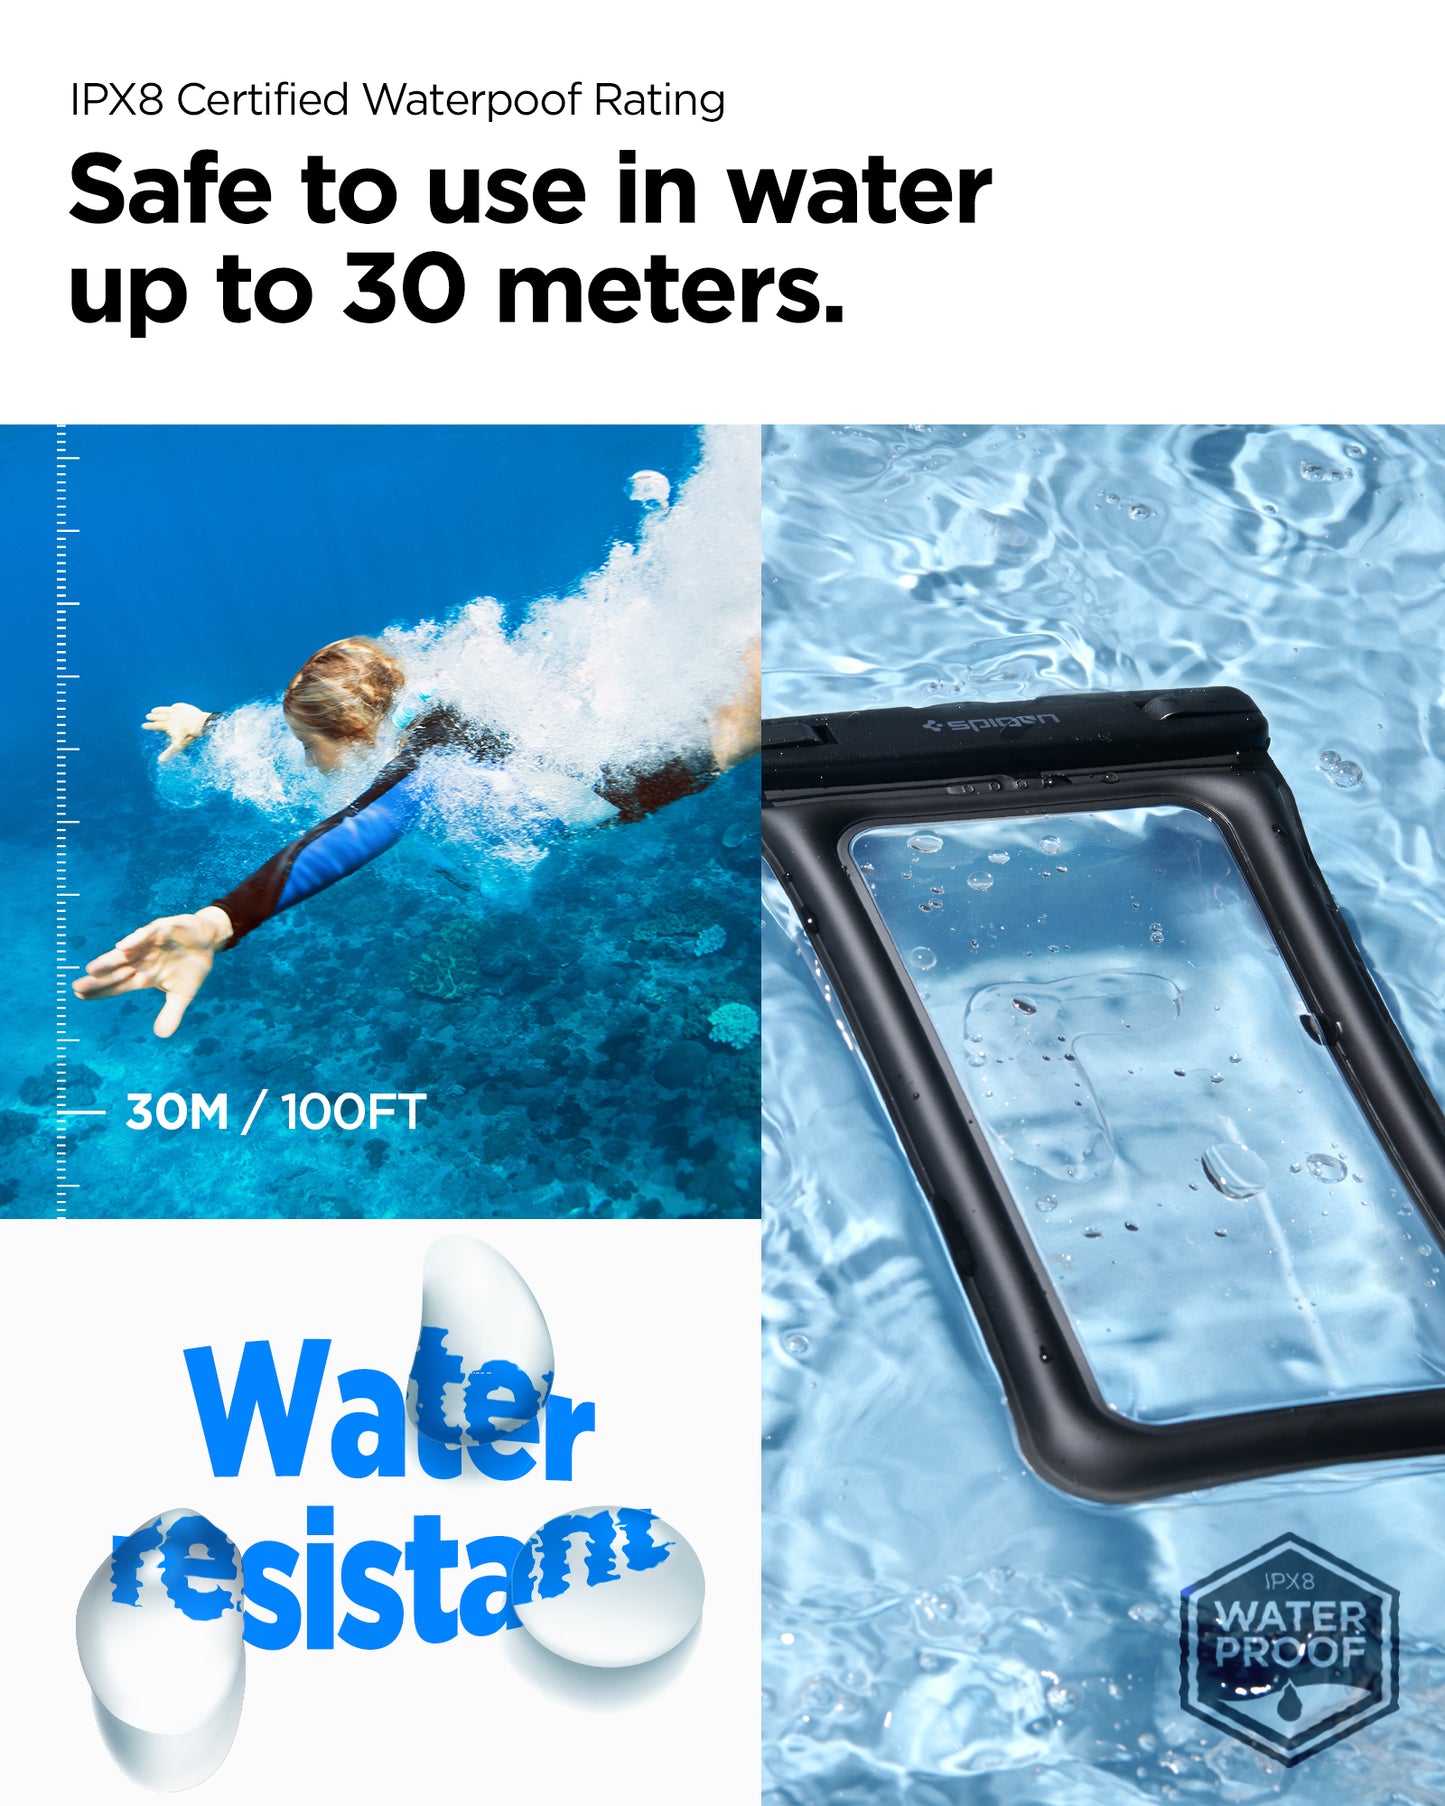 AMP04529 - AquaShield Waterproof Floating Case A610 in Black showing the IPX8 Certified Waterproof Rating, safe to use in water up to 30M/100FT water resistant